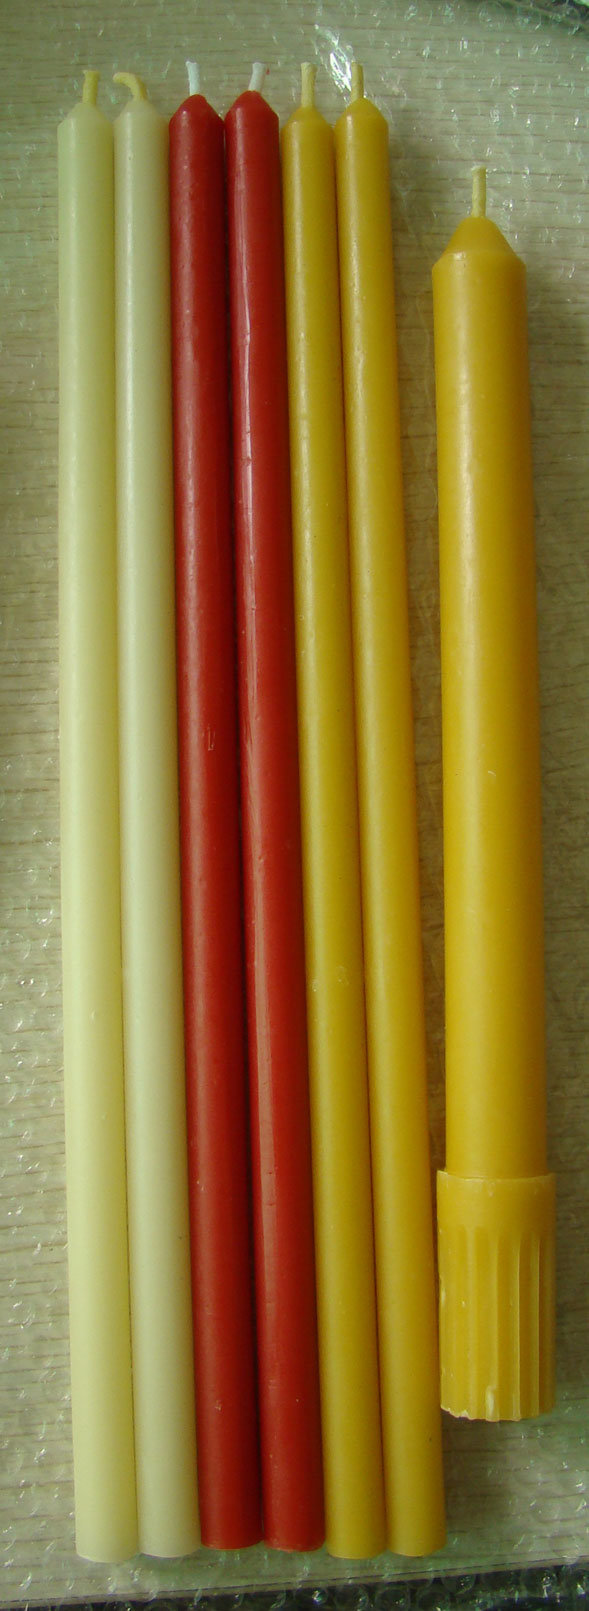 Beeswax Candle - 25